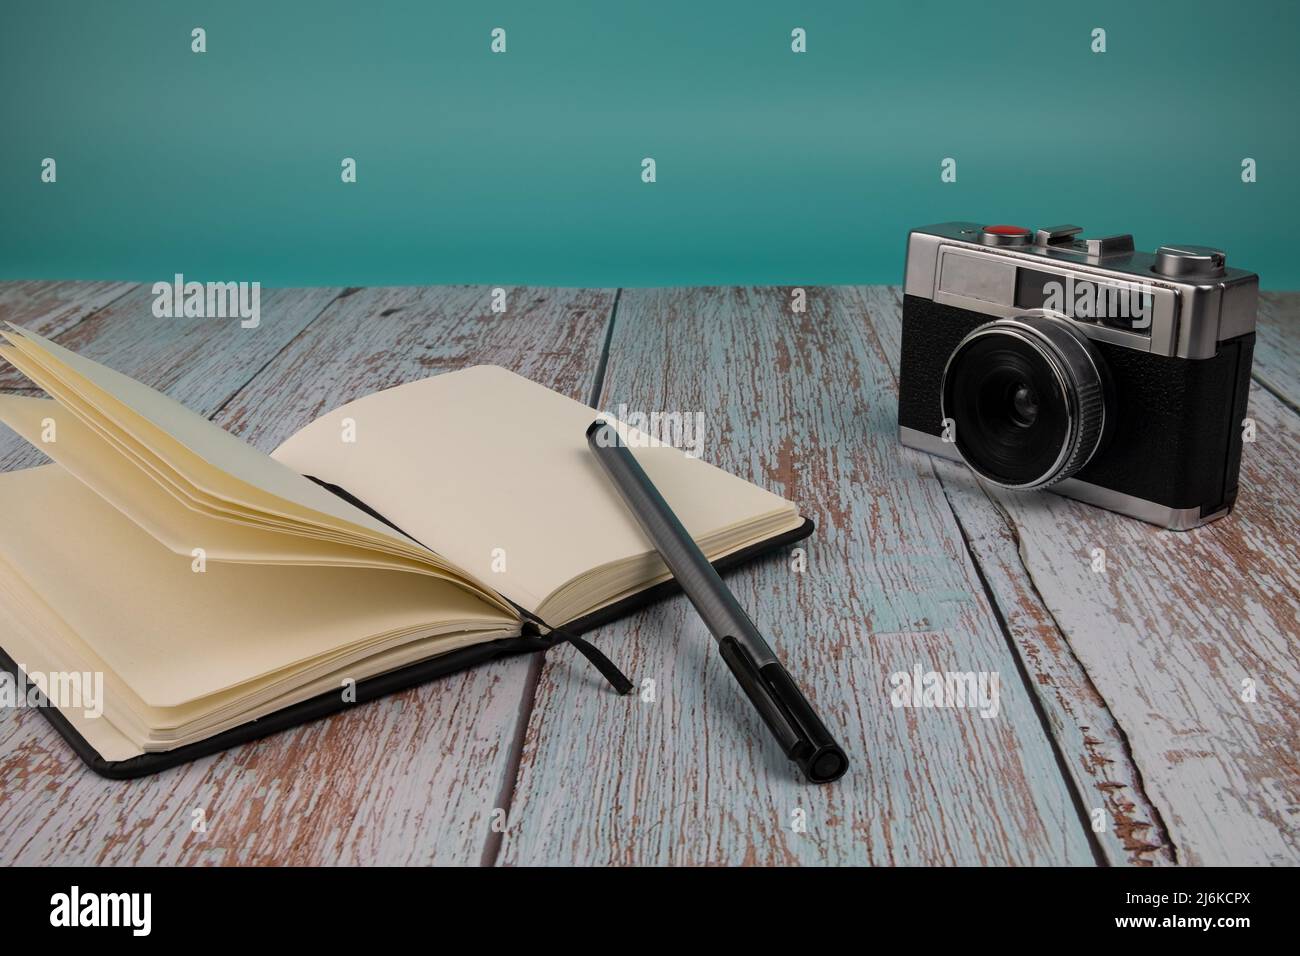 Notebook with a pen and a photo camera, on a wooden table with a light blue background. Free time concept. Stock Photo